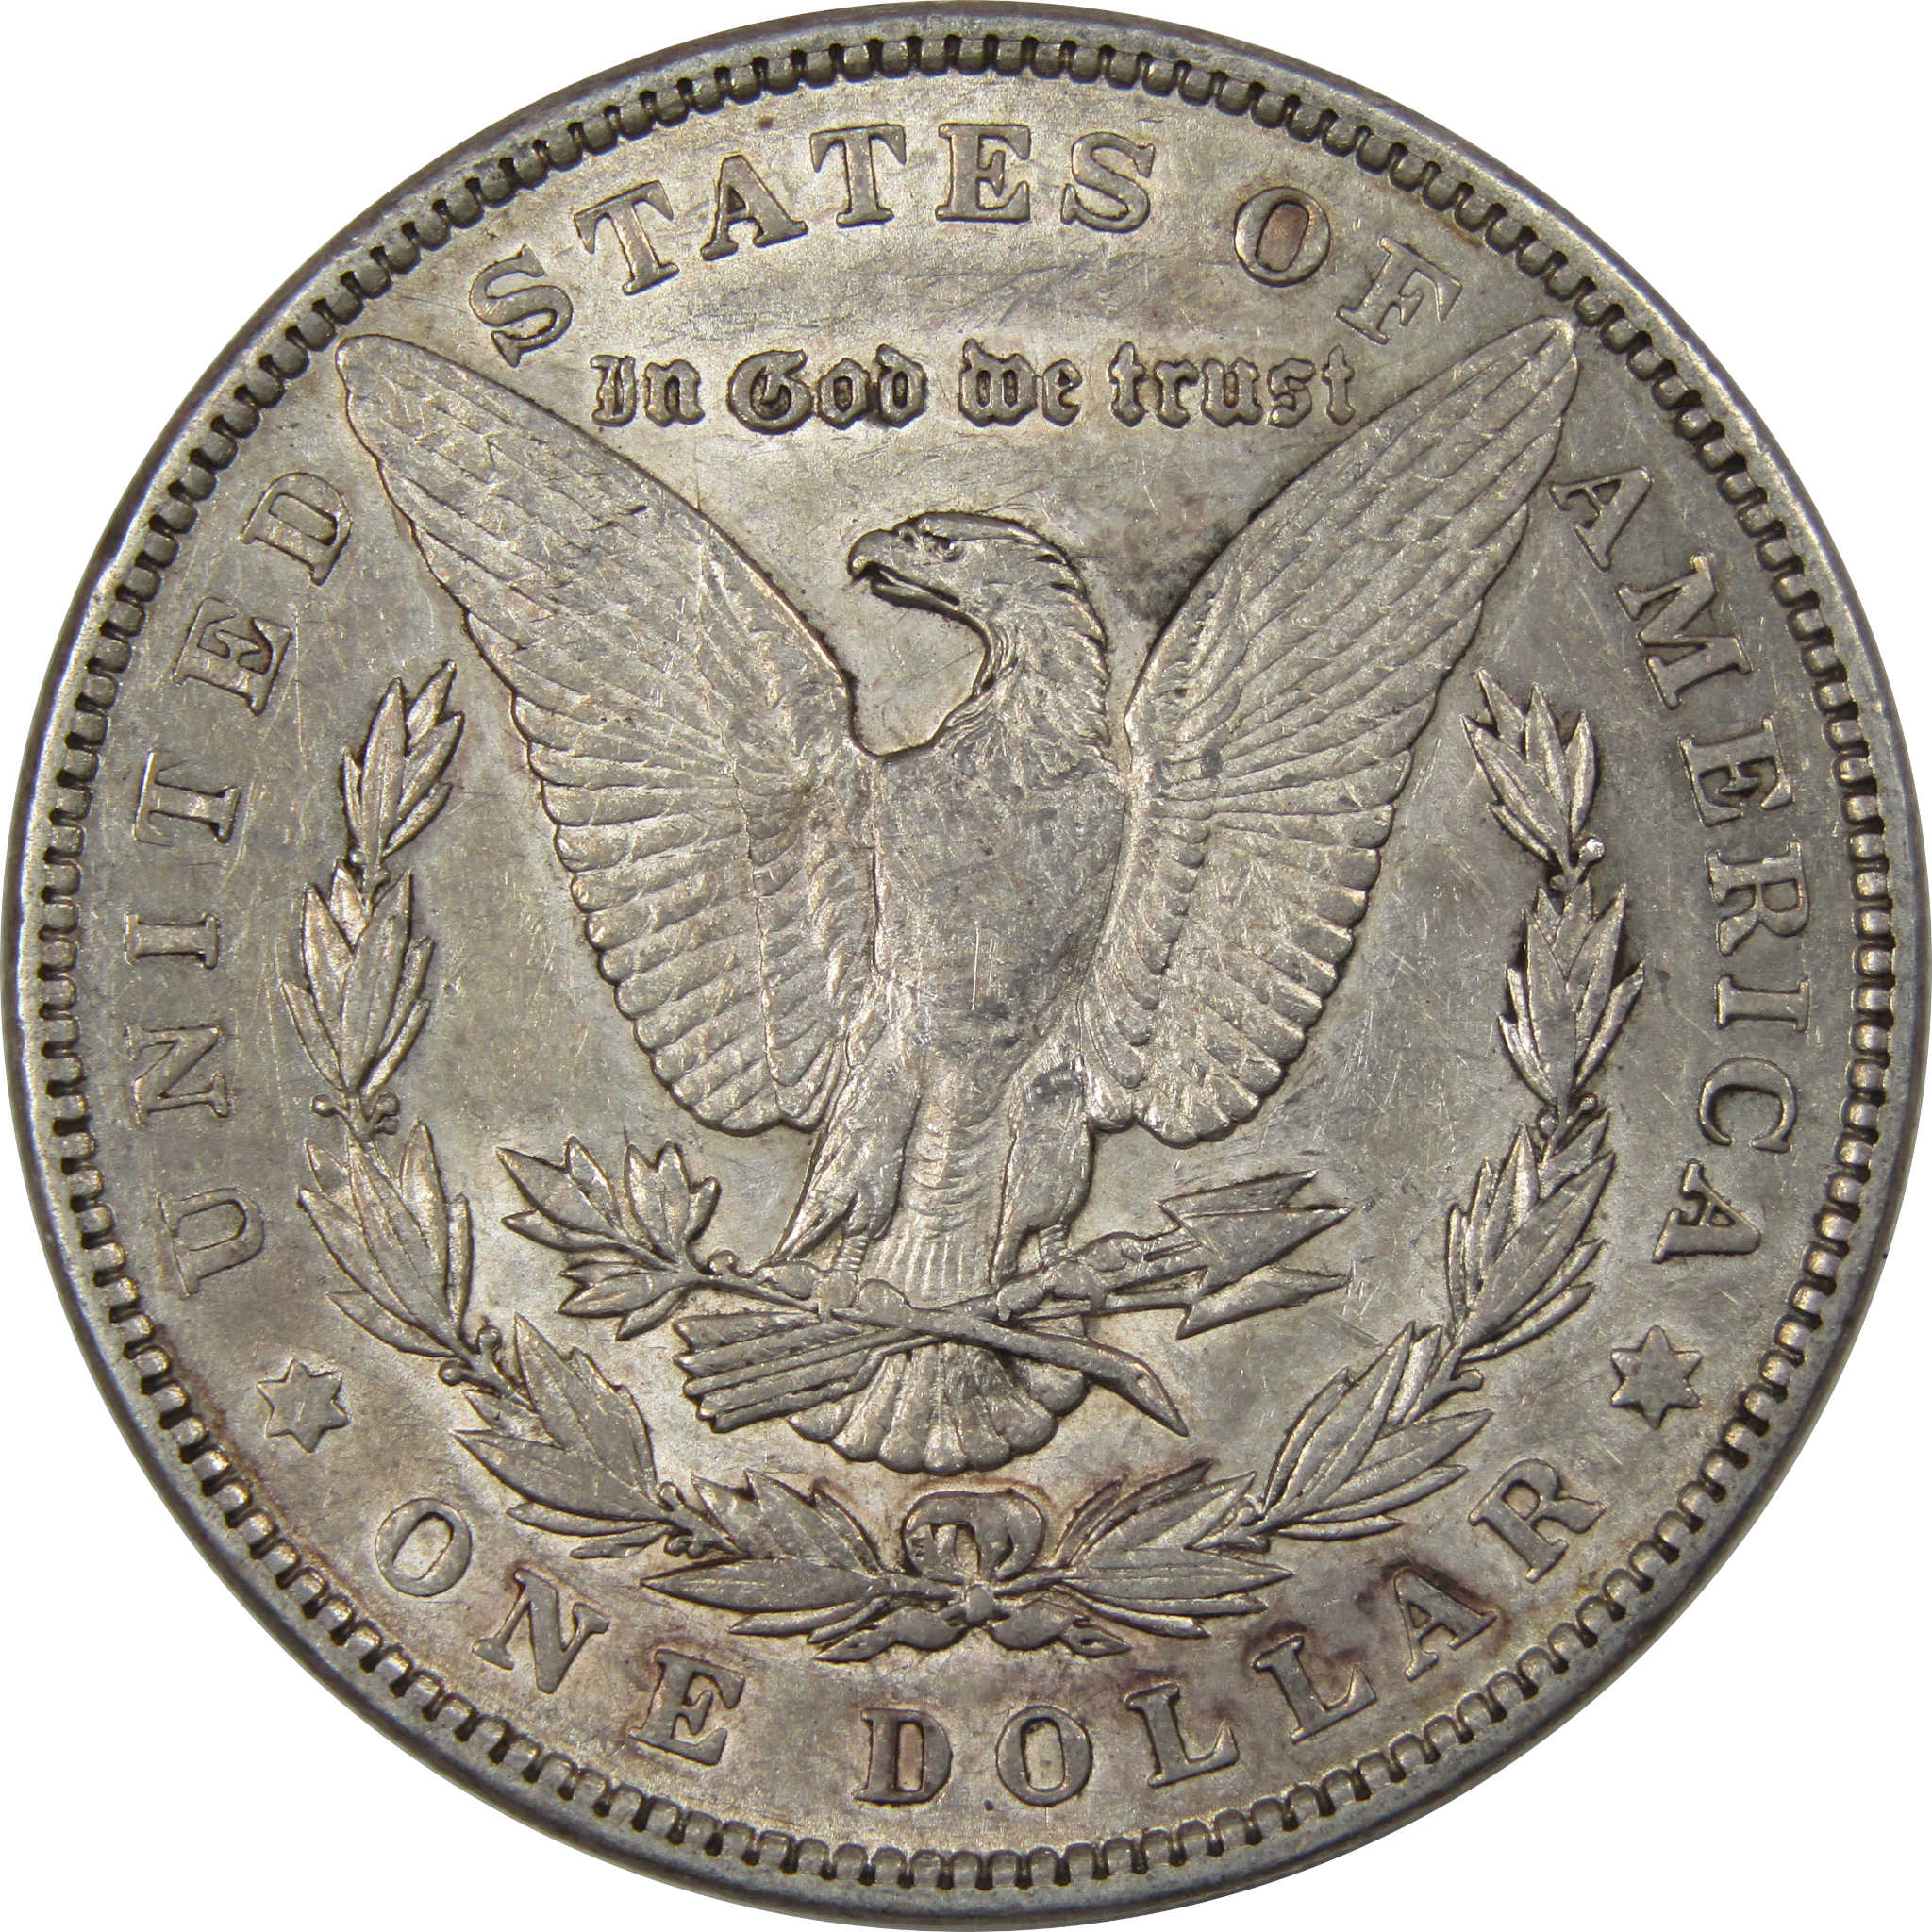 1892 Morgan Dollar AU About Uncirculated 90% Silver Coin SKU:I1296 - Morgan coin - Morgan silver dollar - Morgan silver dollar for sale - Profile Coins &amp; Collectibles